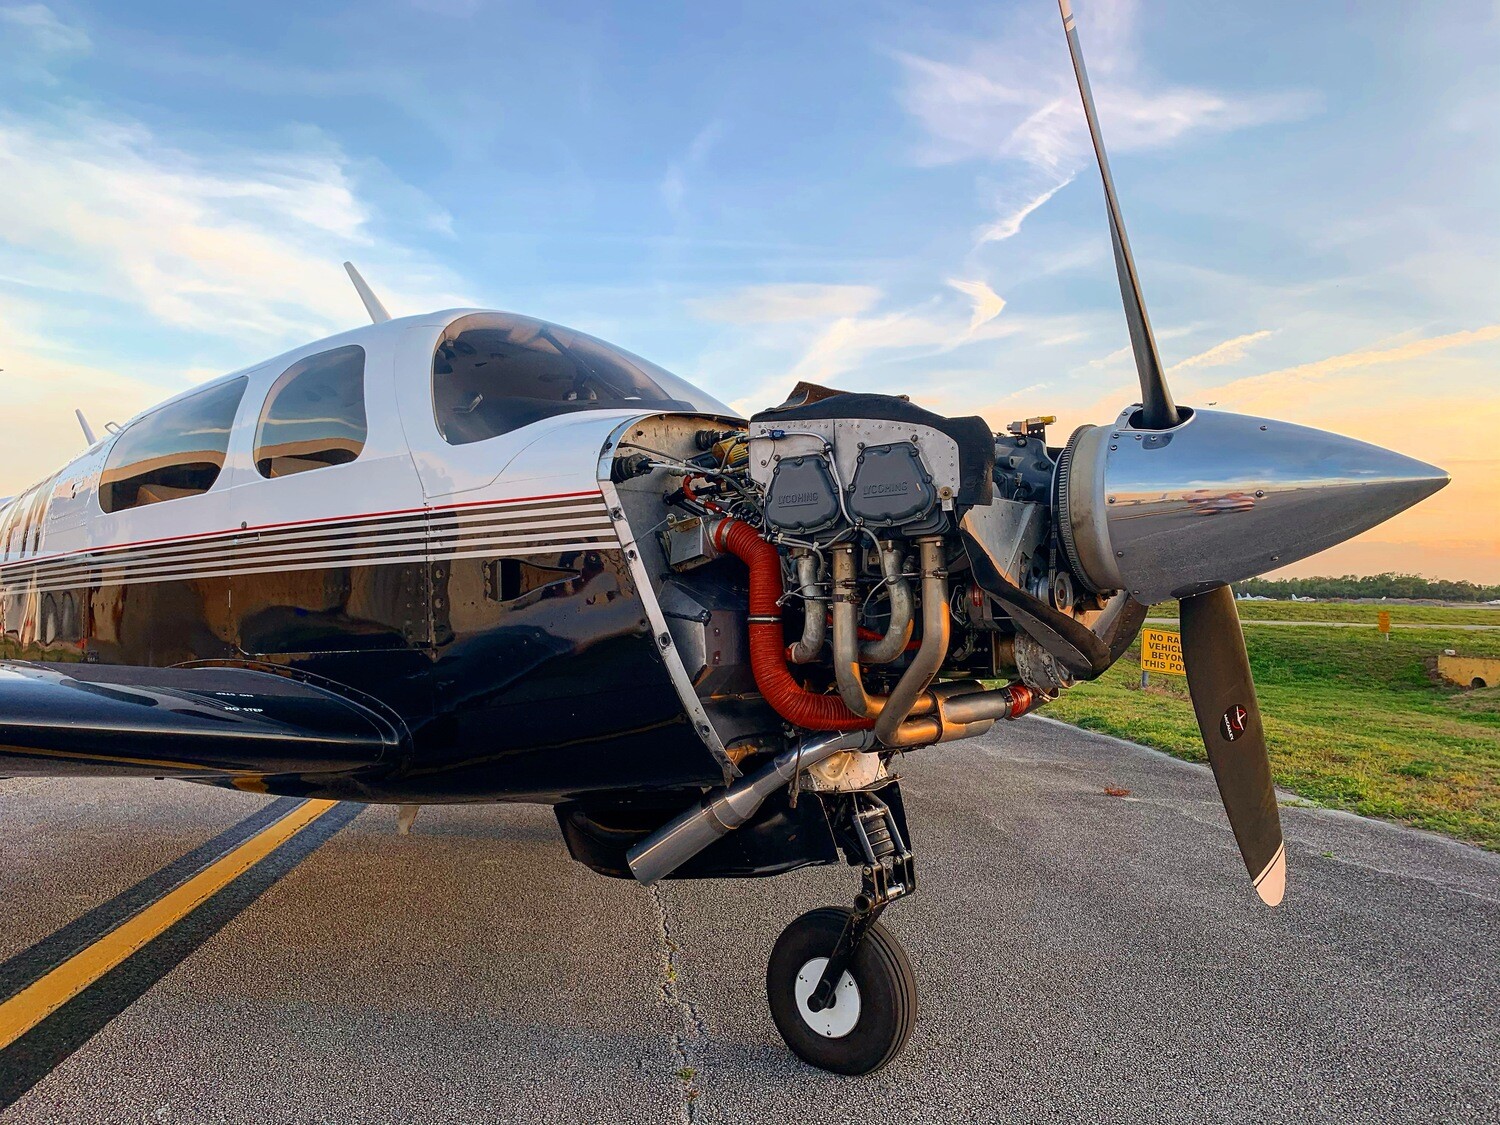 Mooney M20 E, F, & J models with Lycoming IO-360 or IO-390 engines - 200/210 HP